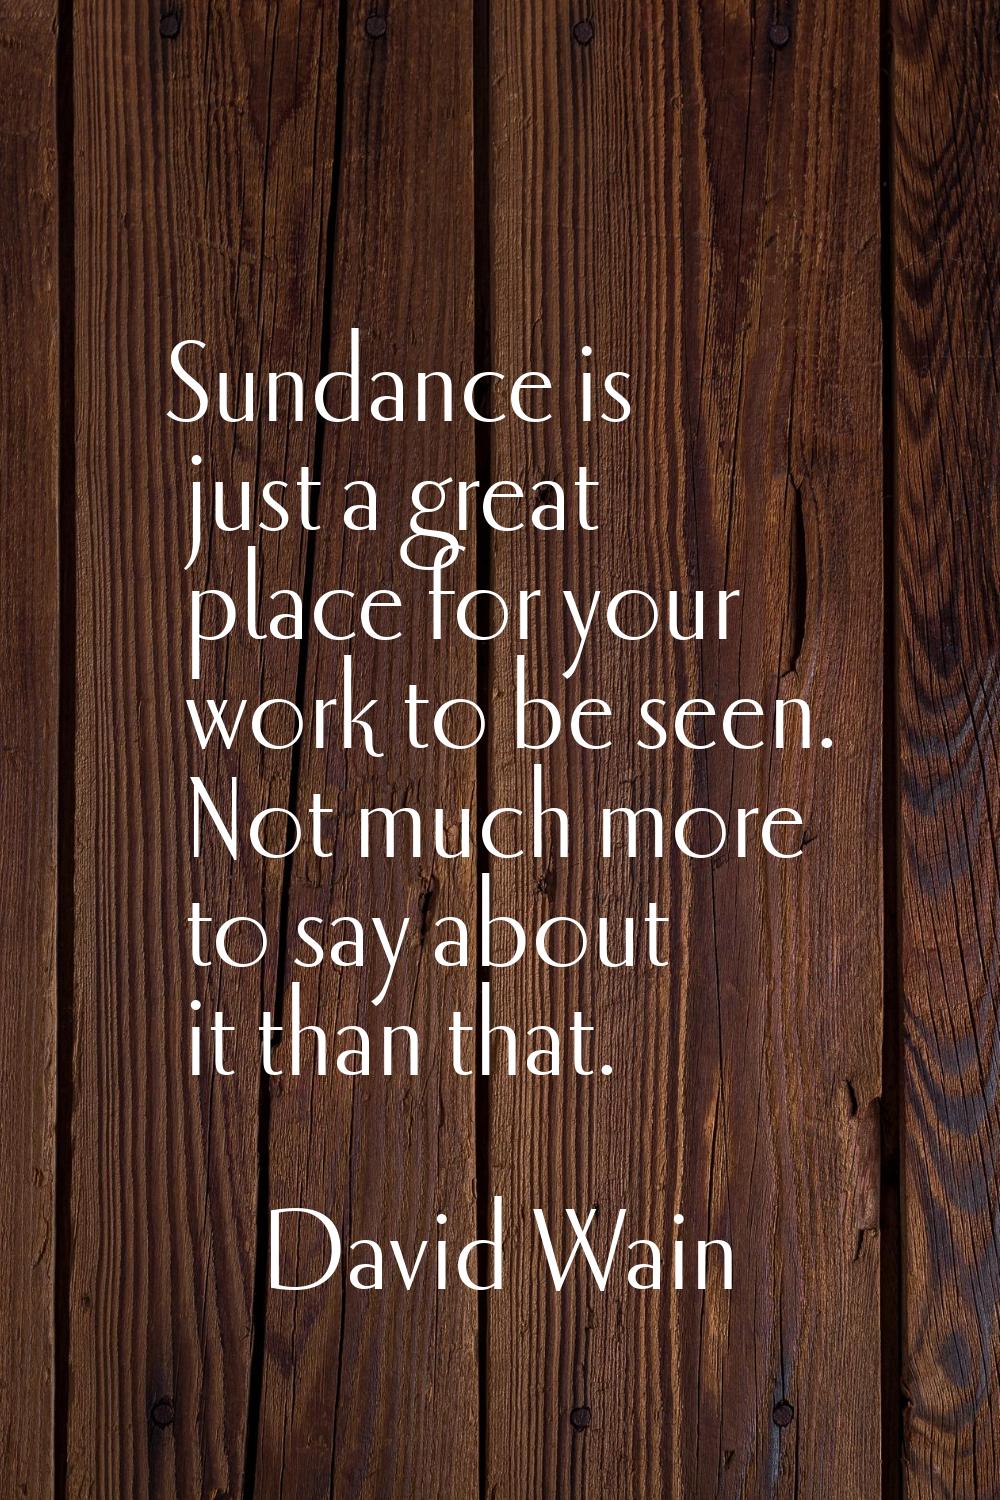 Sundance is just a great place for your work to be seen. Not much more to say about it than that.